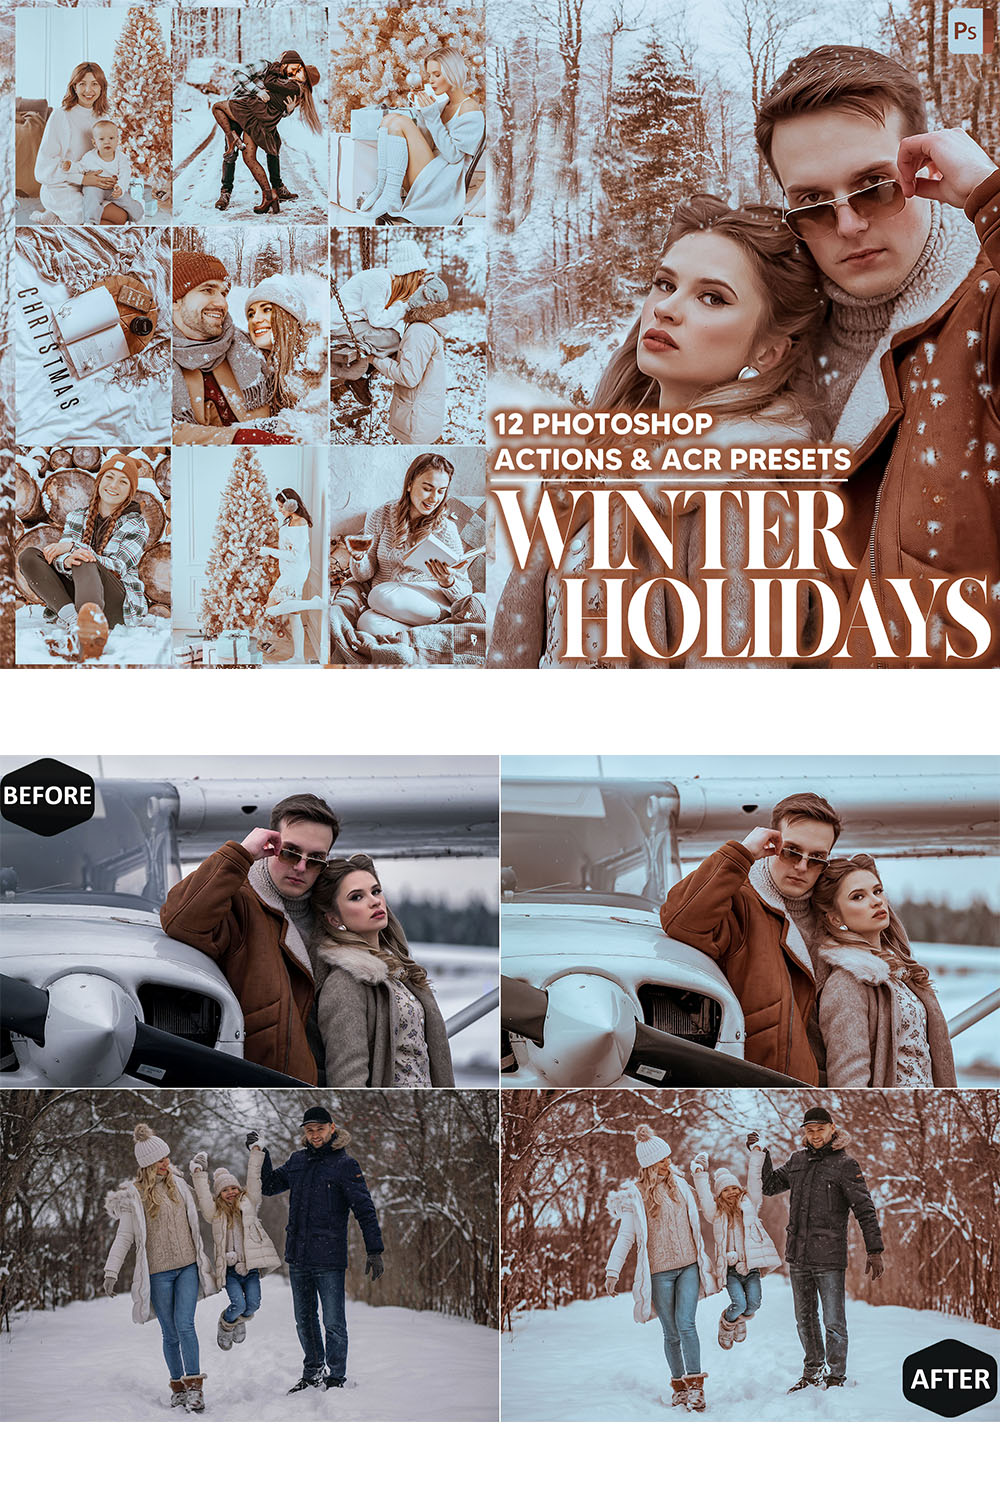 12 Photoshop Actions, Winter Holidays Ps Action, Xmas ACR Preset, Cocoa Ps Filter, Atn Portrait And Lifestyle Theme For Instagram, Blogger pinterest preview image.